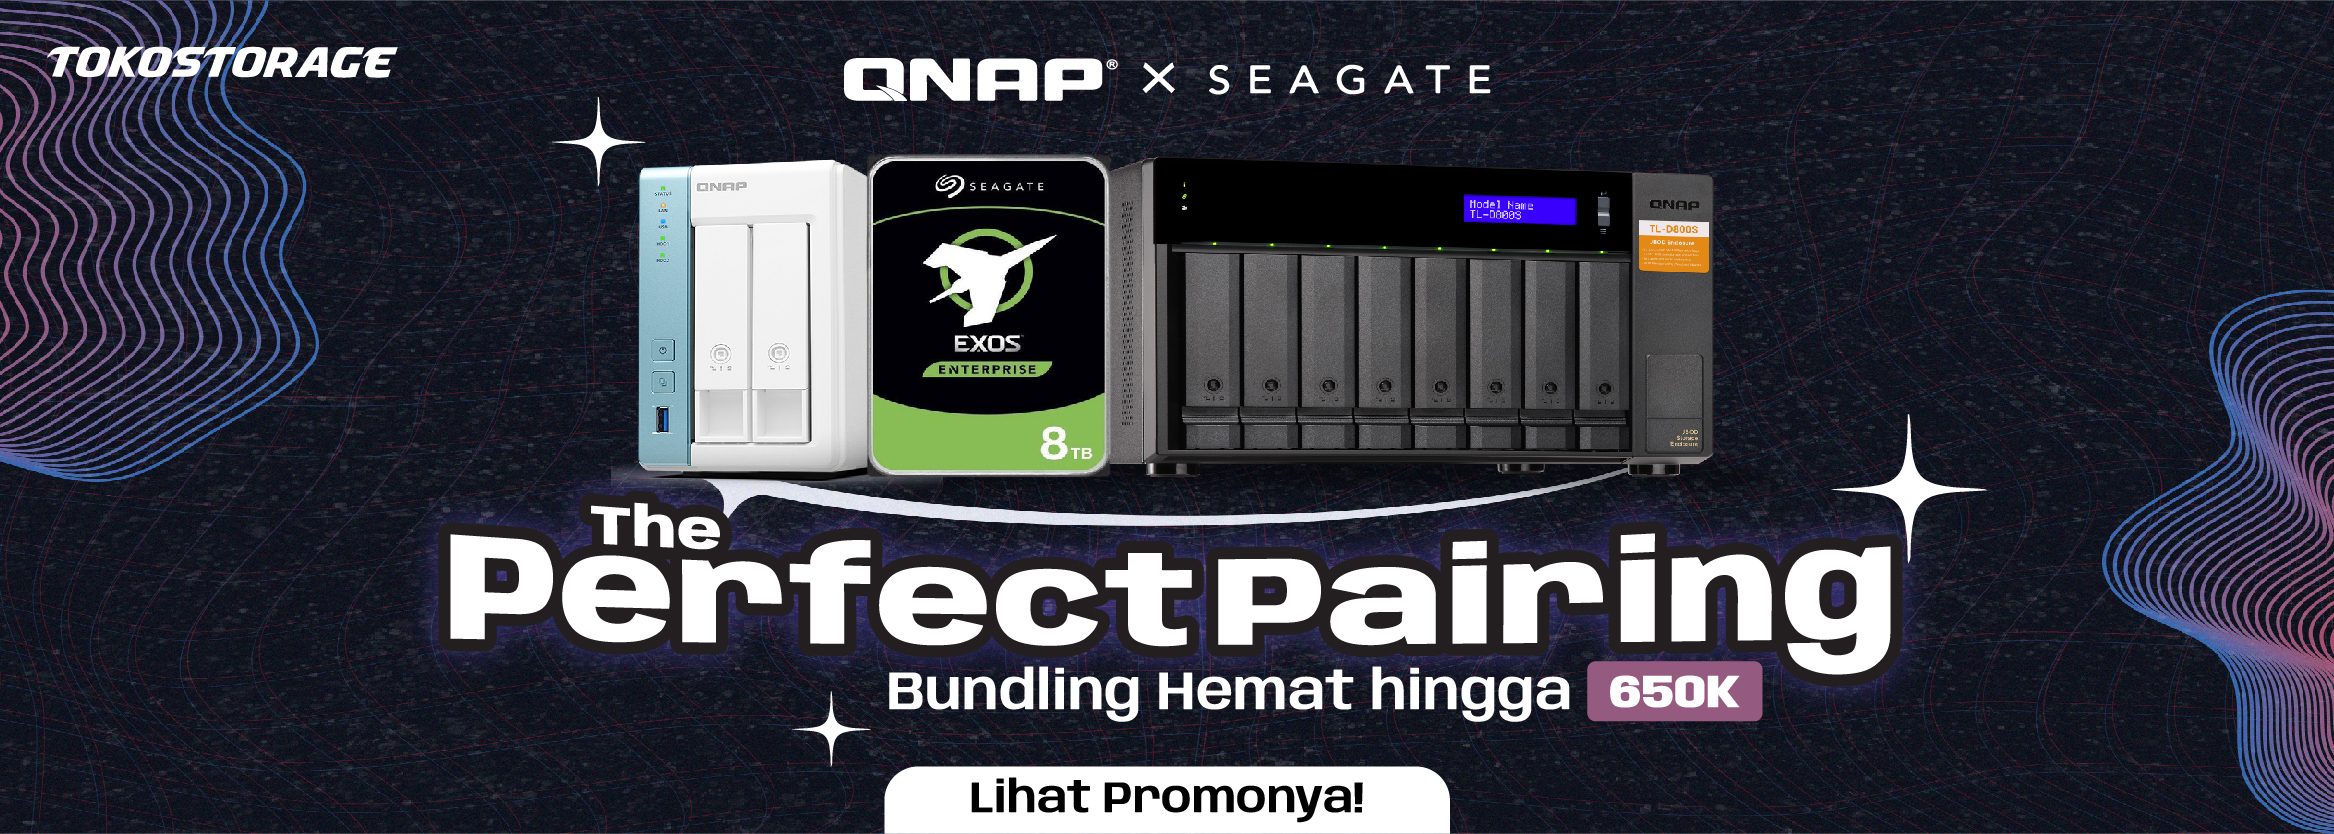 QNAP x SEAGATE - The Perfect Pairing